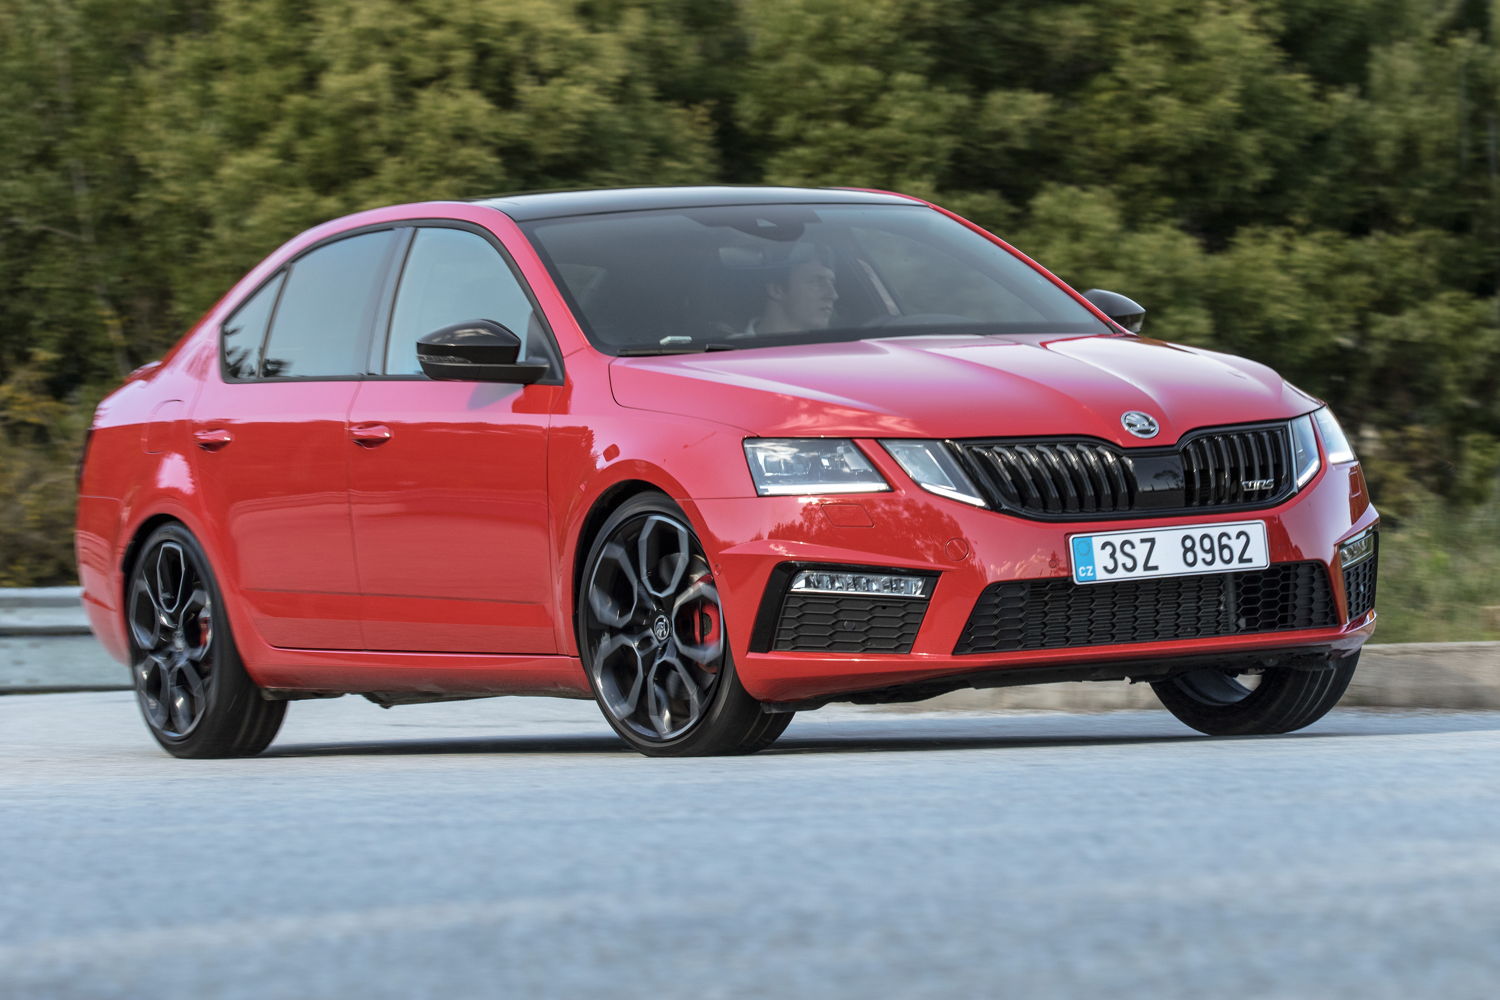 The most powerful and fastest ŠKODA OCTAVIA in the company’s history promises the ultimate driving experience. The power output of the ŠKODA OCTAVIA RS 245 has been increased to 180 kW (245 PS). One highlight of the modern chassis technology is the electronically regulated VAQ limited-slip differential.